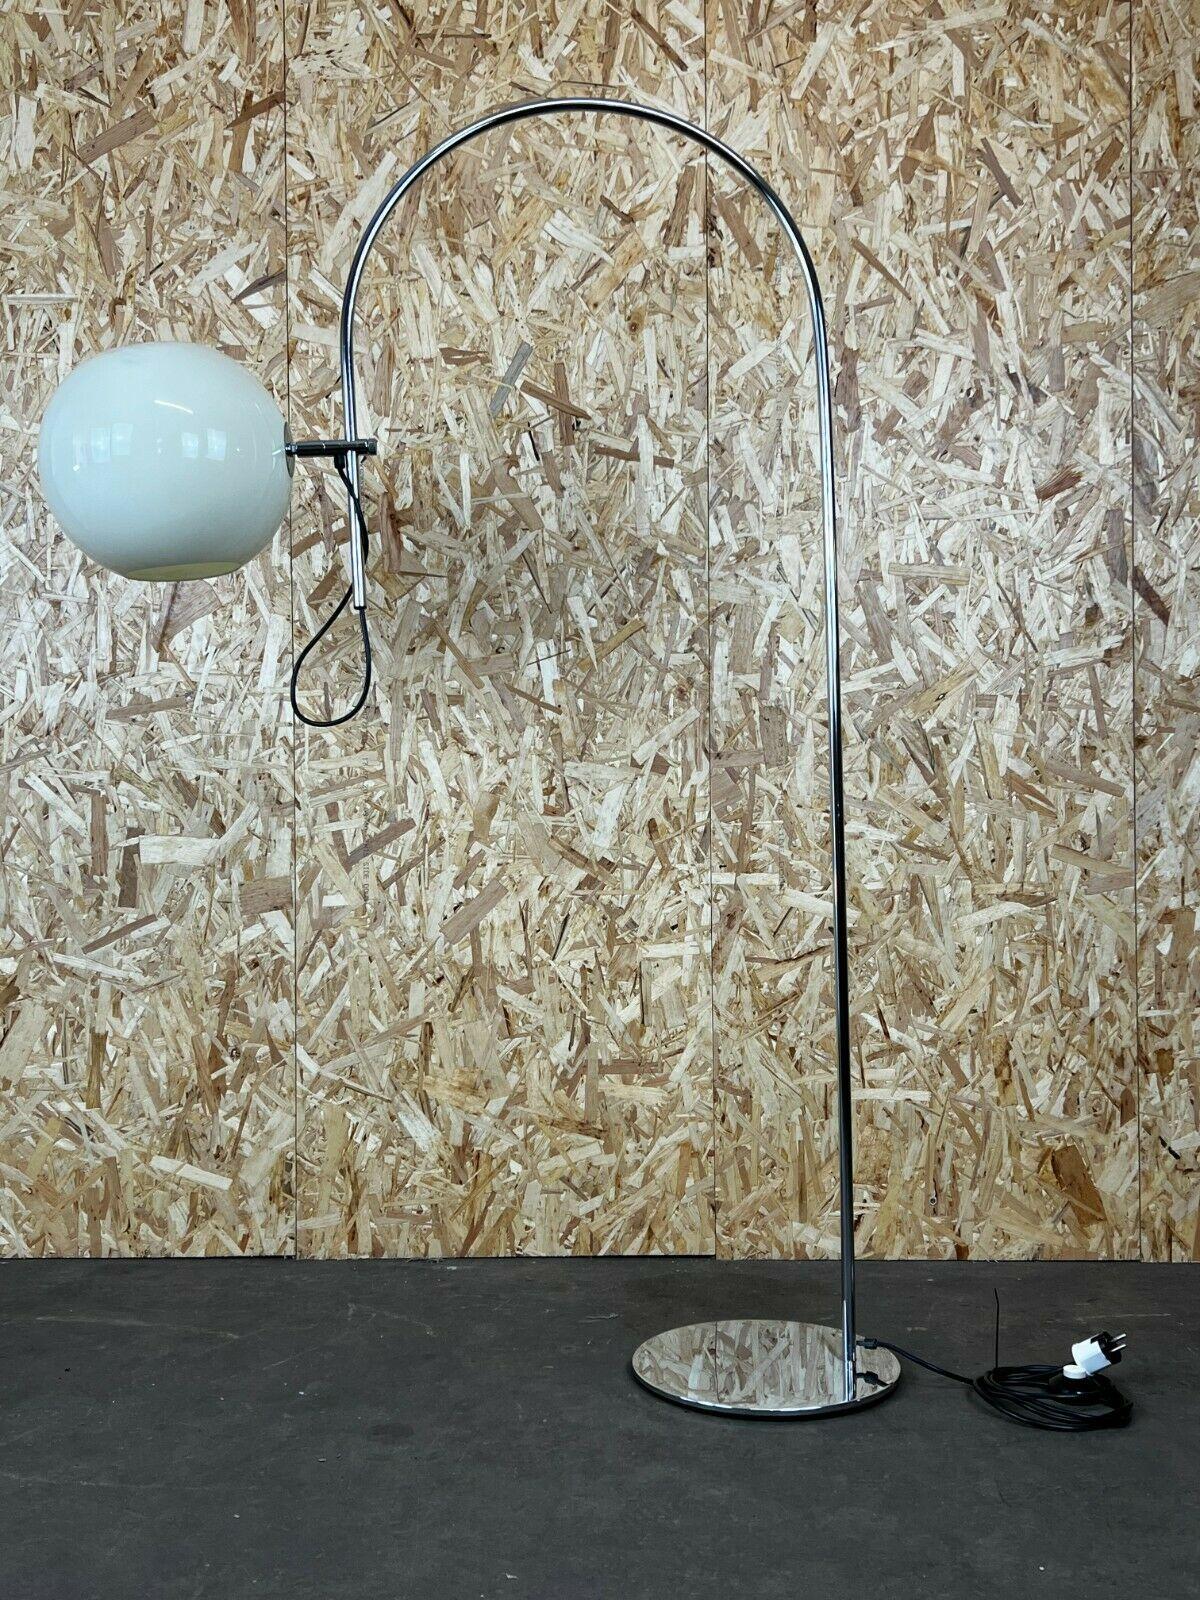 60s 70s lamp light floor lamp arc lamp Wila Leuchten Space Age 60s

Object: arc lamp

Manufacturer: Wila lights

Condition: good - vintage

Age: around 1960-1970

Dimensions:

100cm x 154cm x 32cm

Other notes:

The pictures serve as